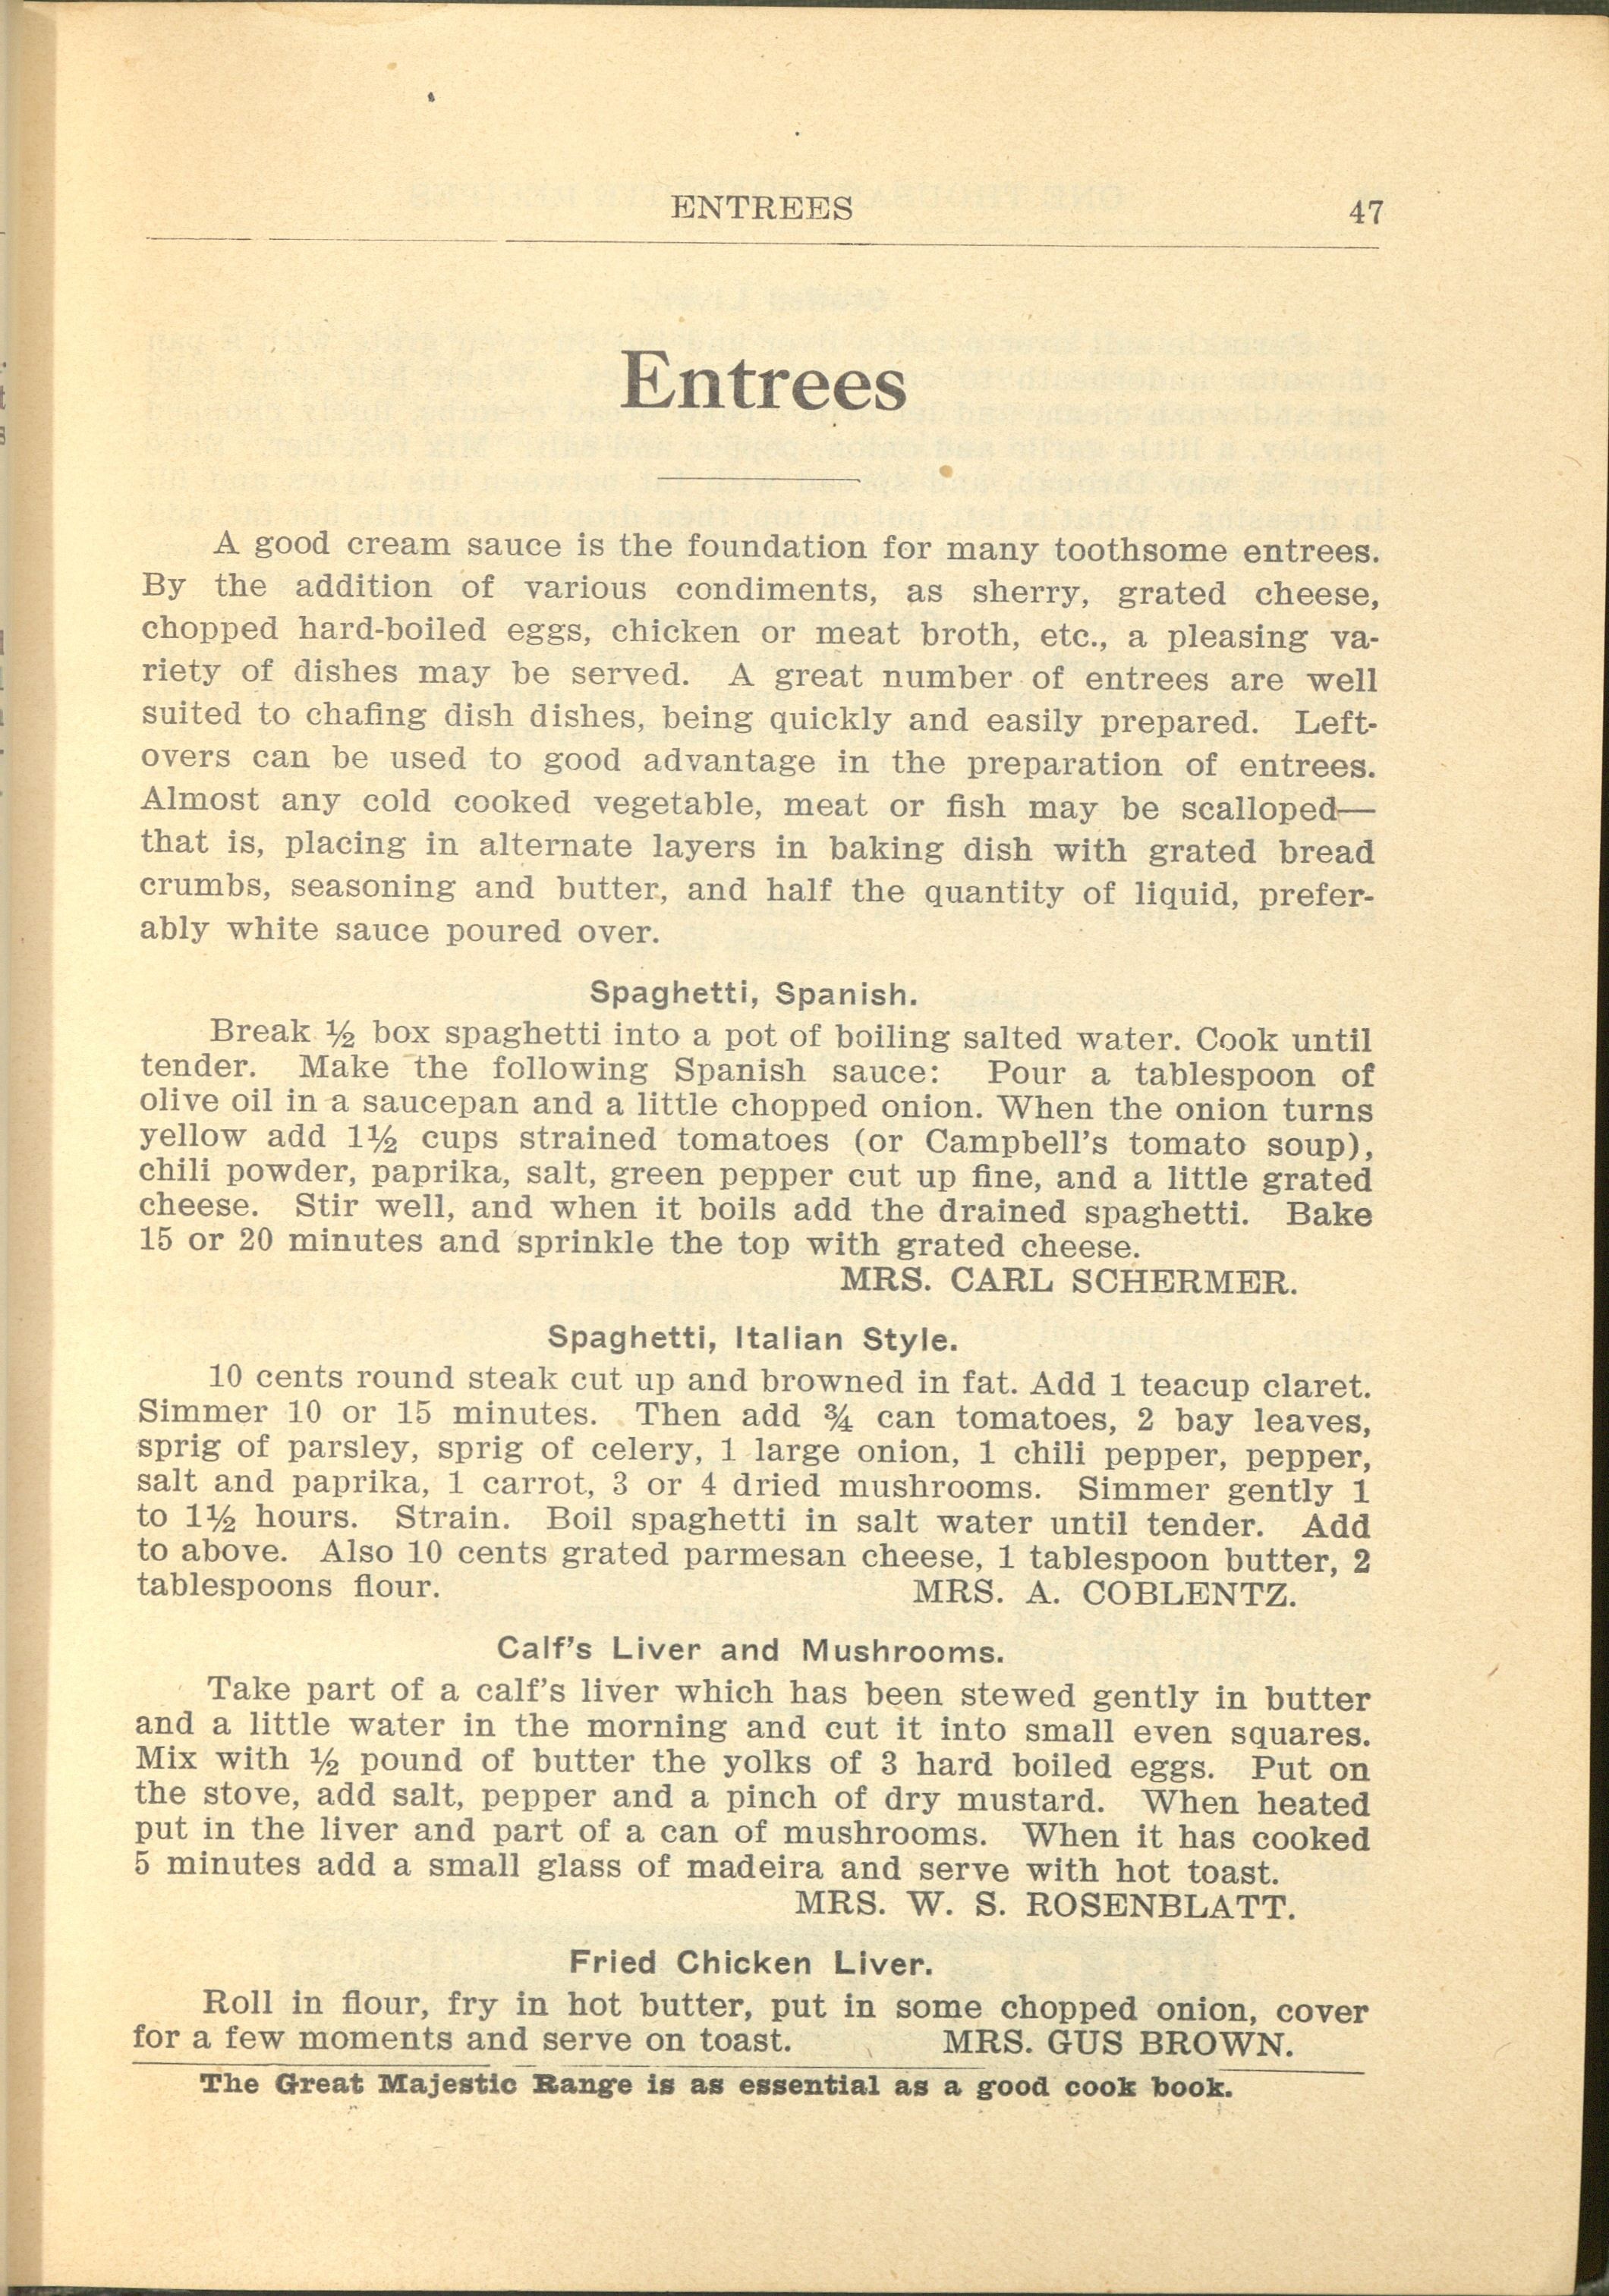 Page showing the first page of the chapter on Entrees, with recipes for Spaghetti, Spanish; Spaghetti, Italian Style, Calf's Liver and Mushrooms; and Fried Chicken Liver